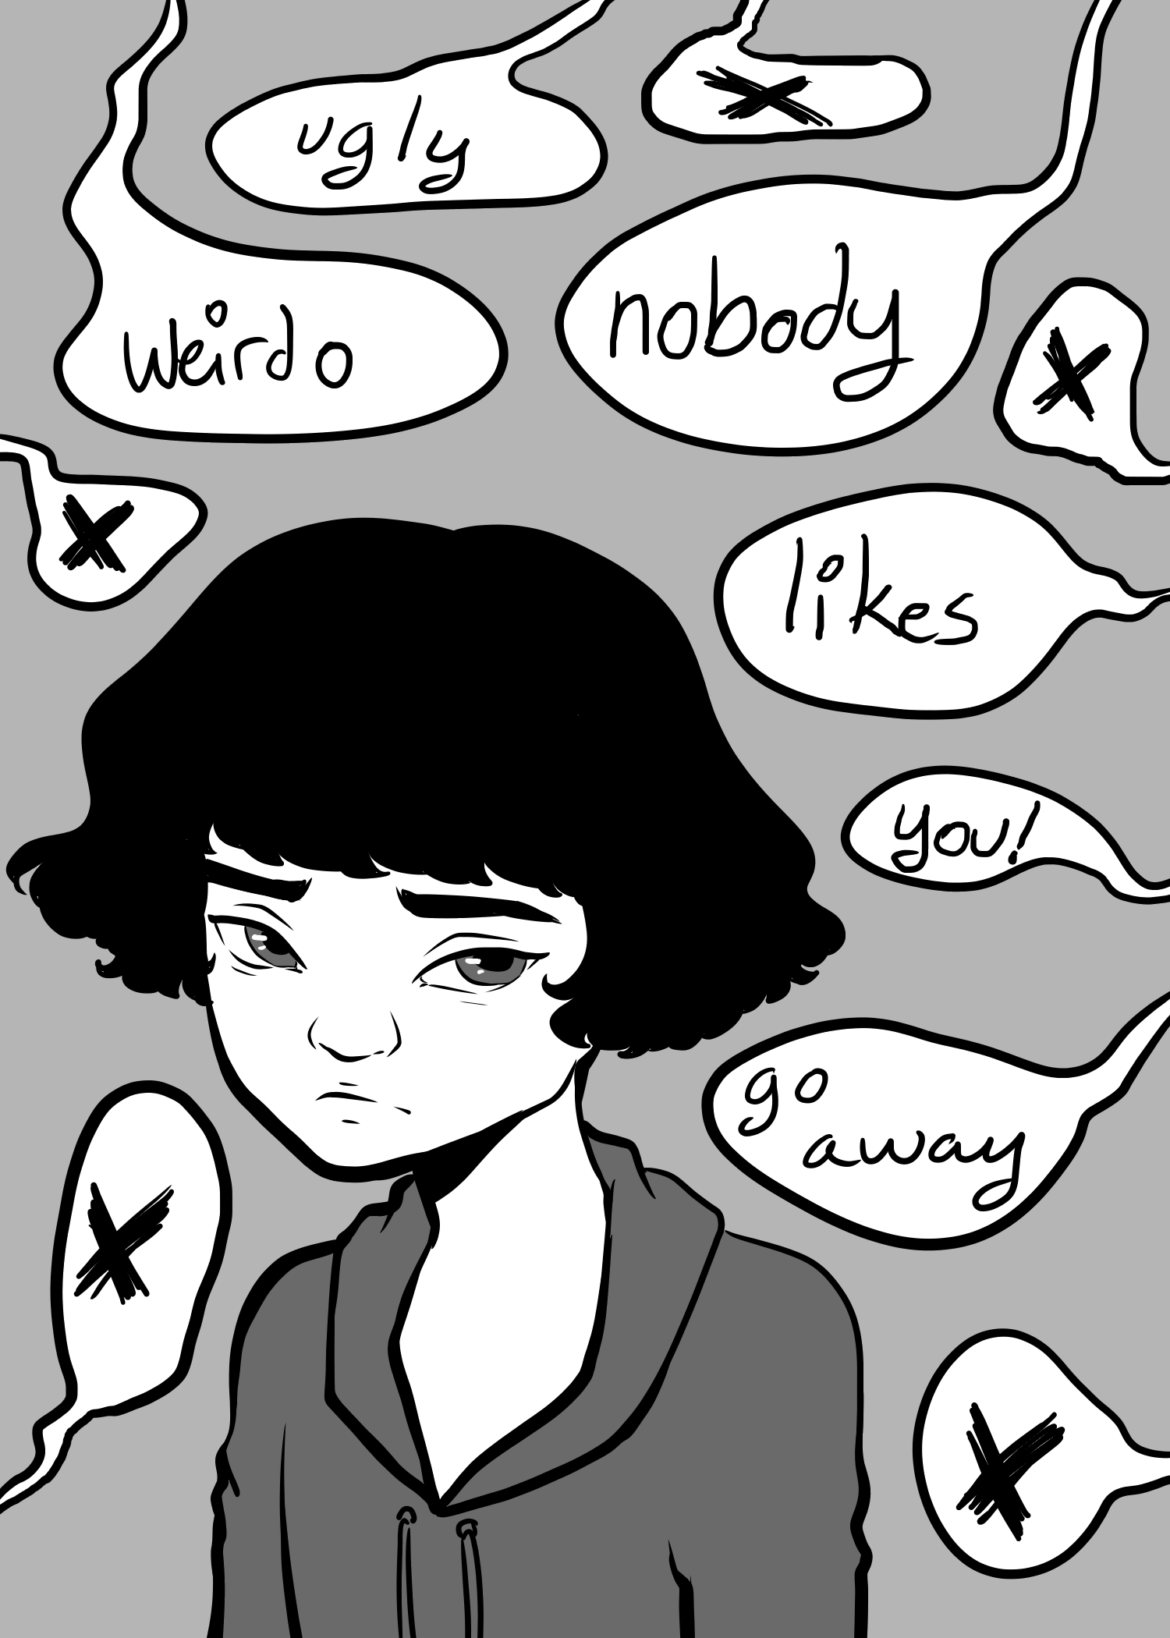 A illustration with a girl surrounded by a lot of offensive words.